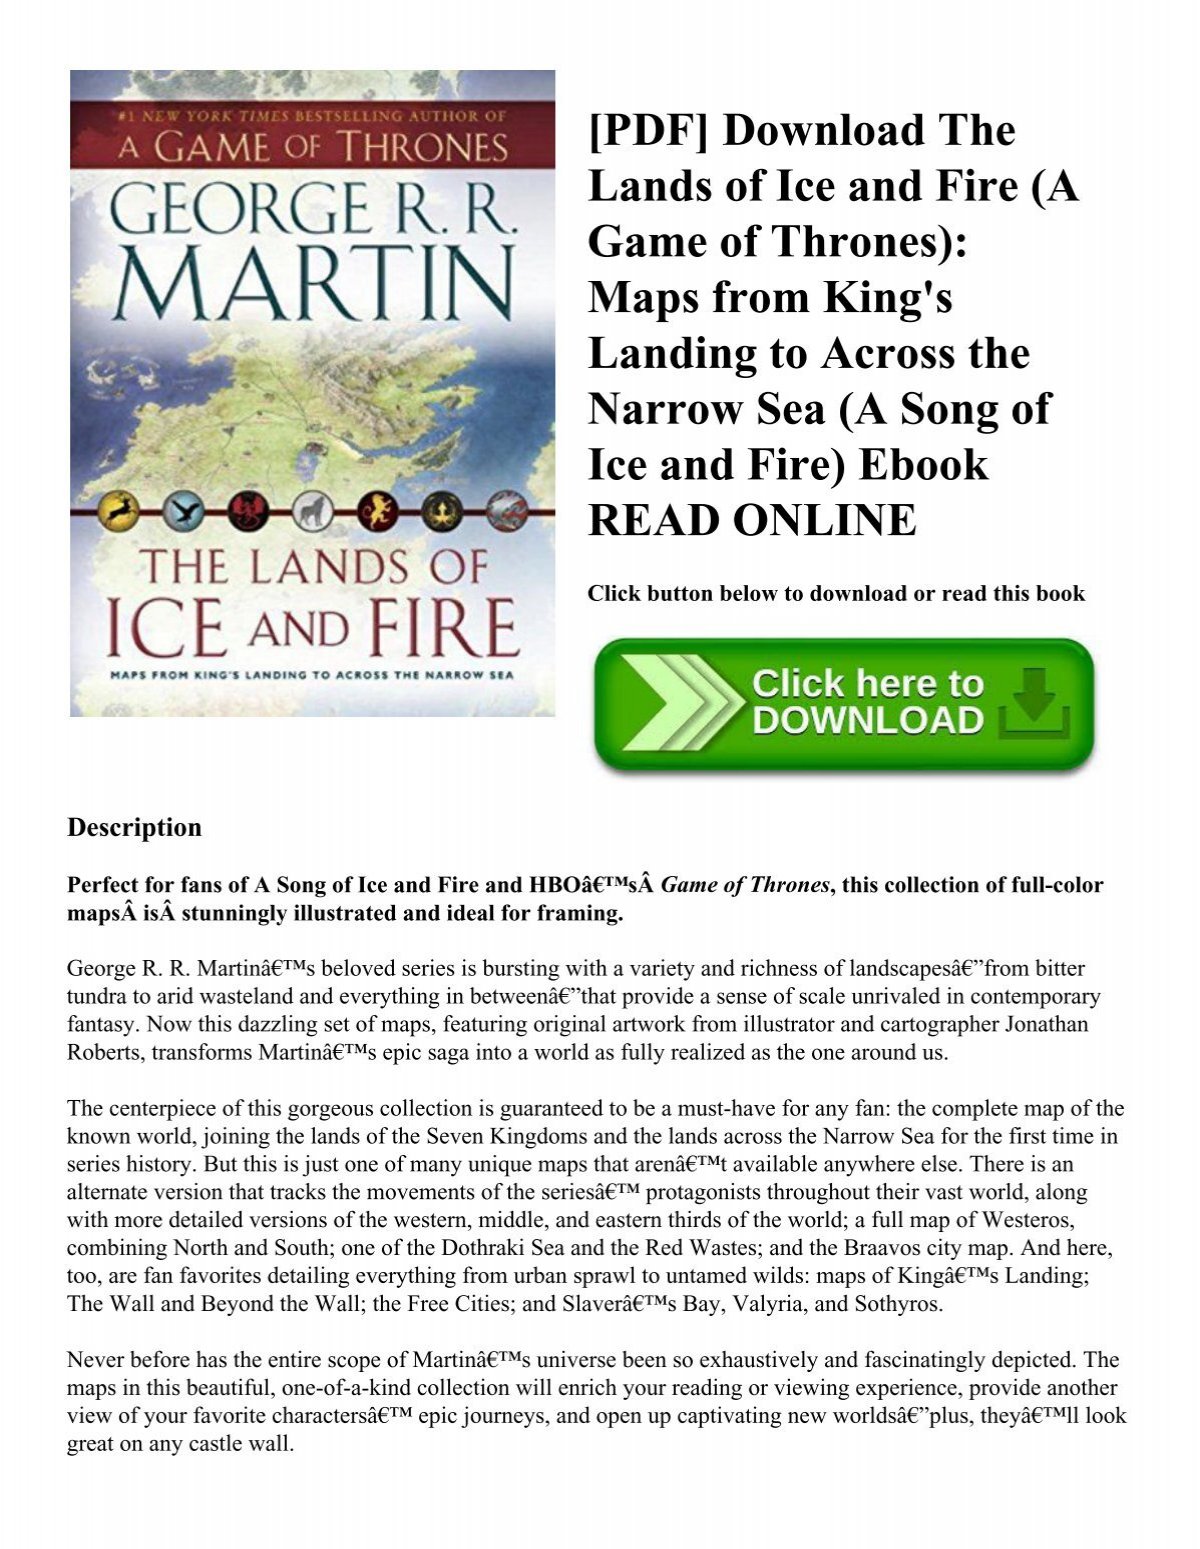 Pdf Download The Lands Of Ice And Fire A Game Of Thrones Maps From King S Landing To Across The Narrow Sea A Song Of Ice And Fire Ebook Read Online